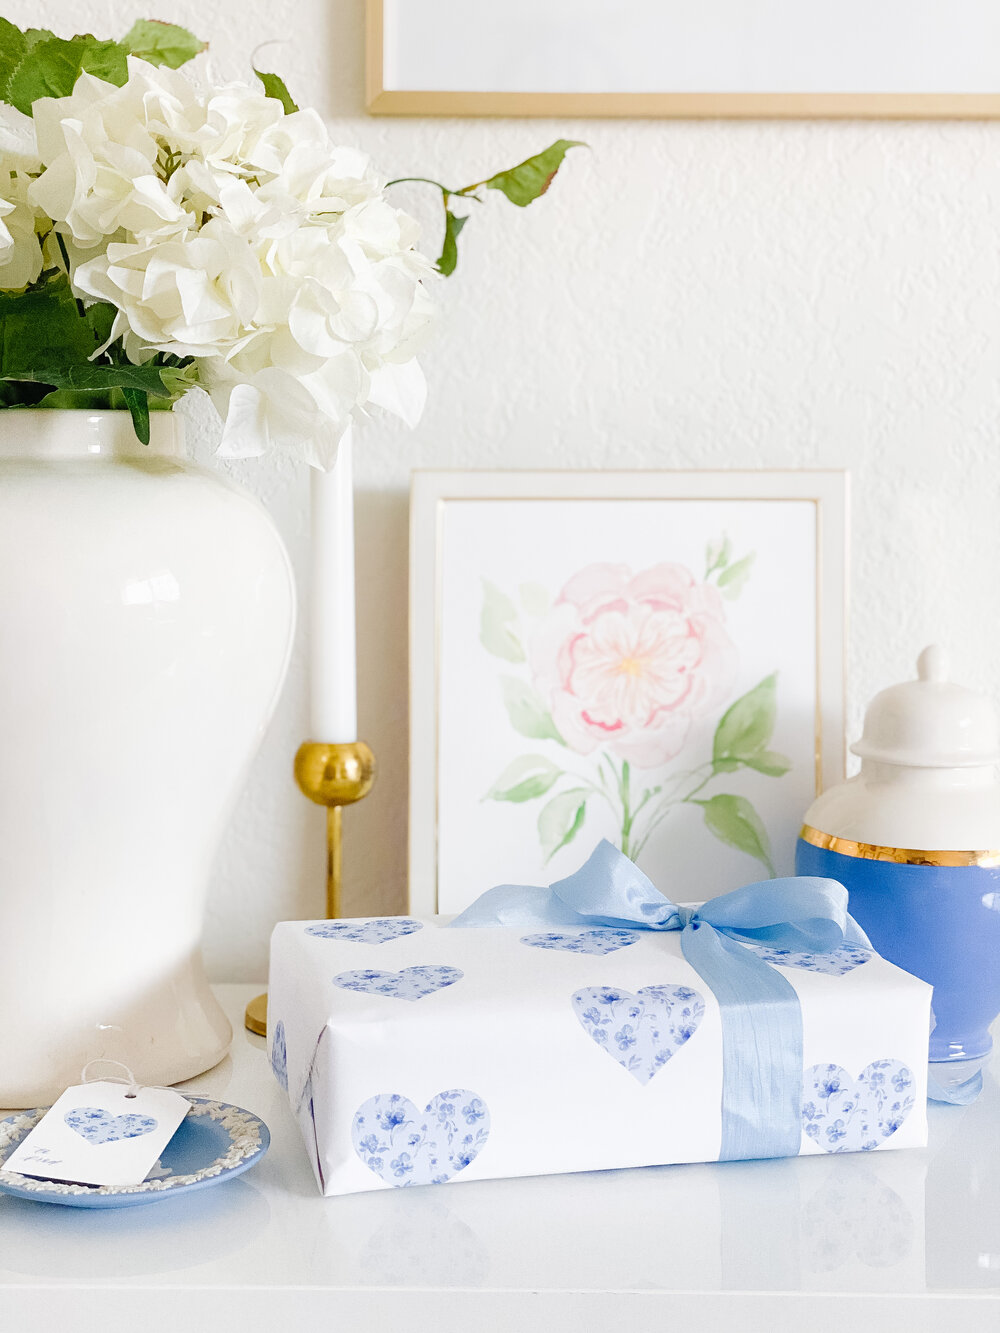 Blue Floral Wrapping Paper